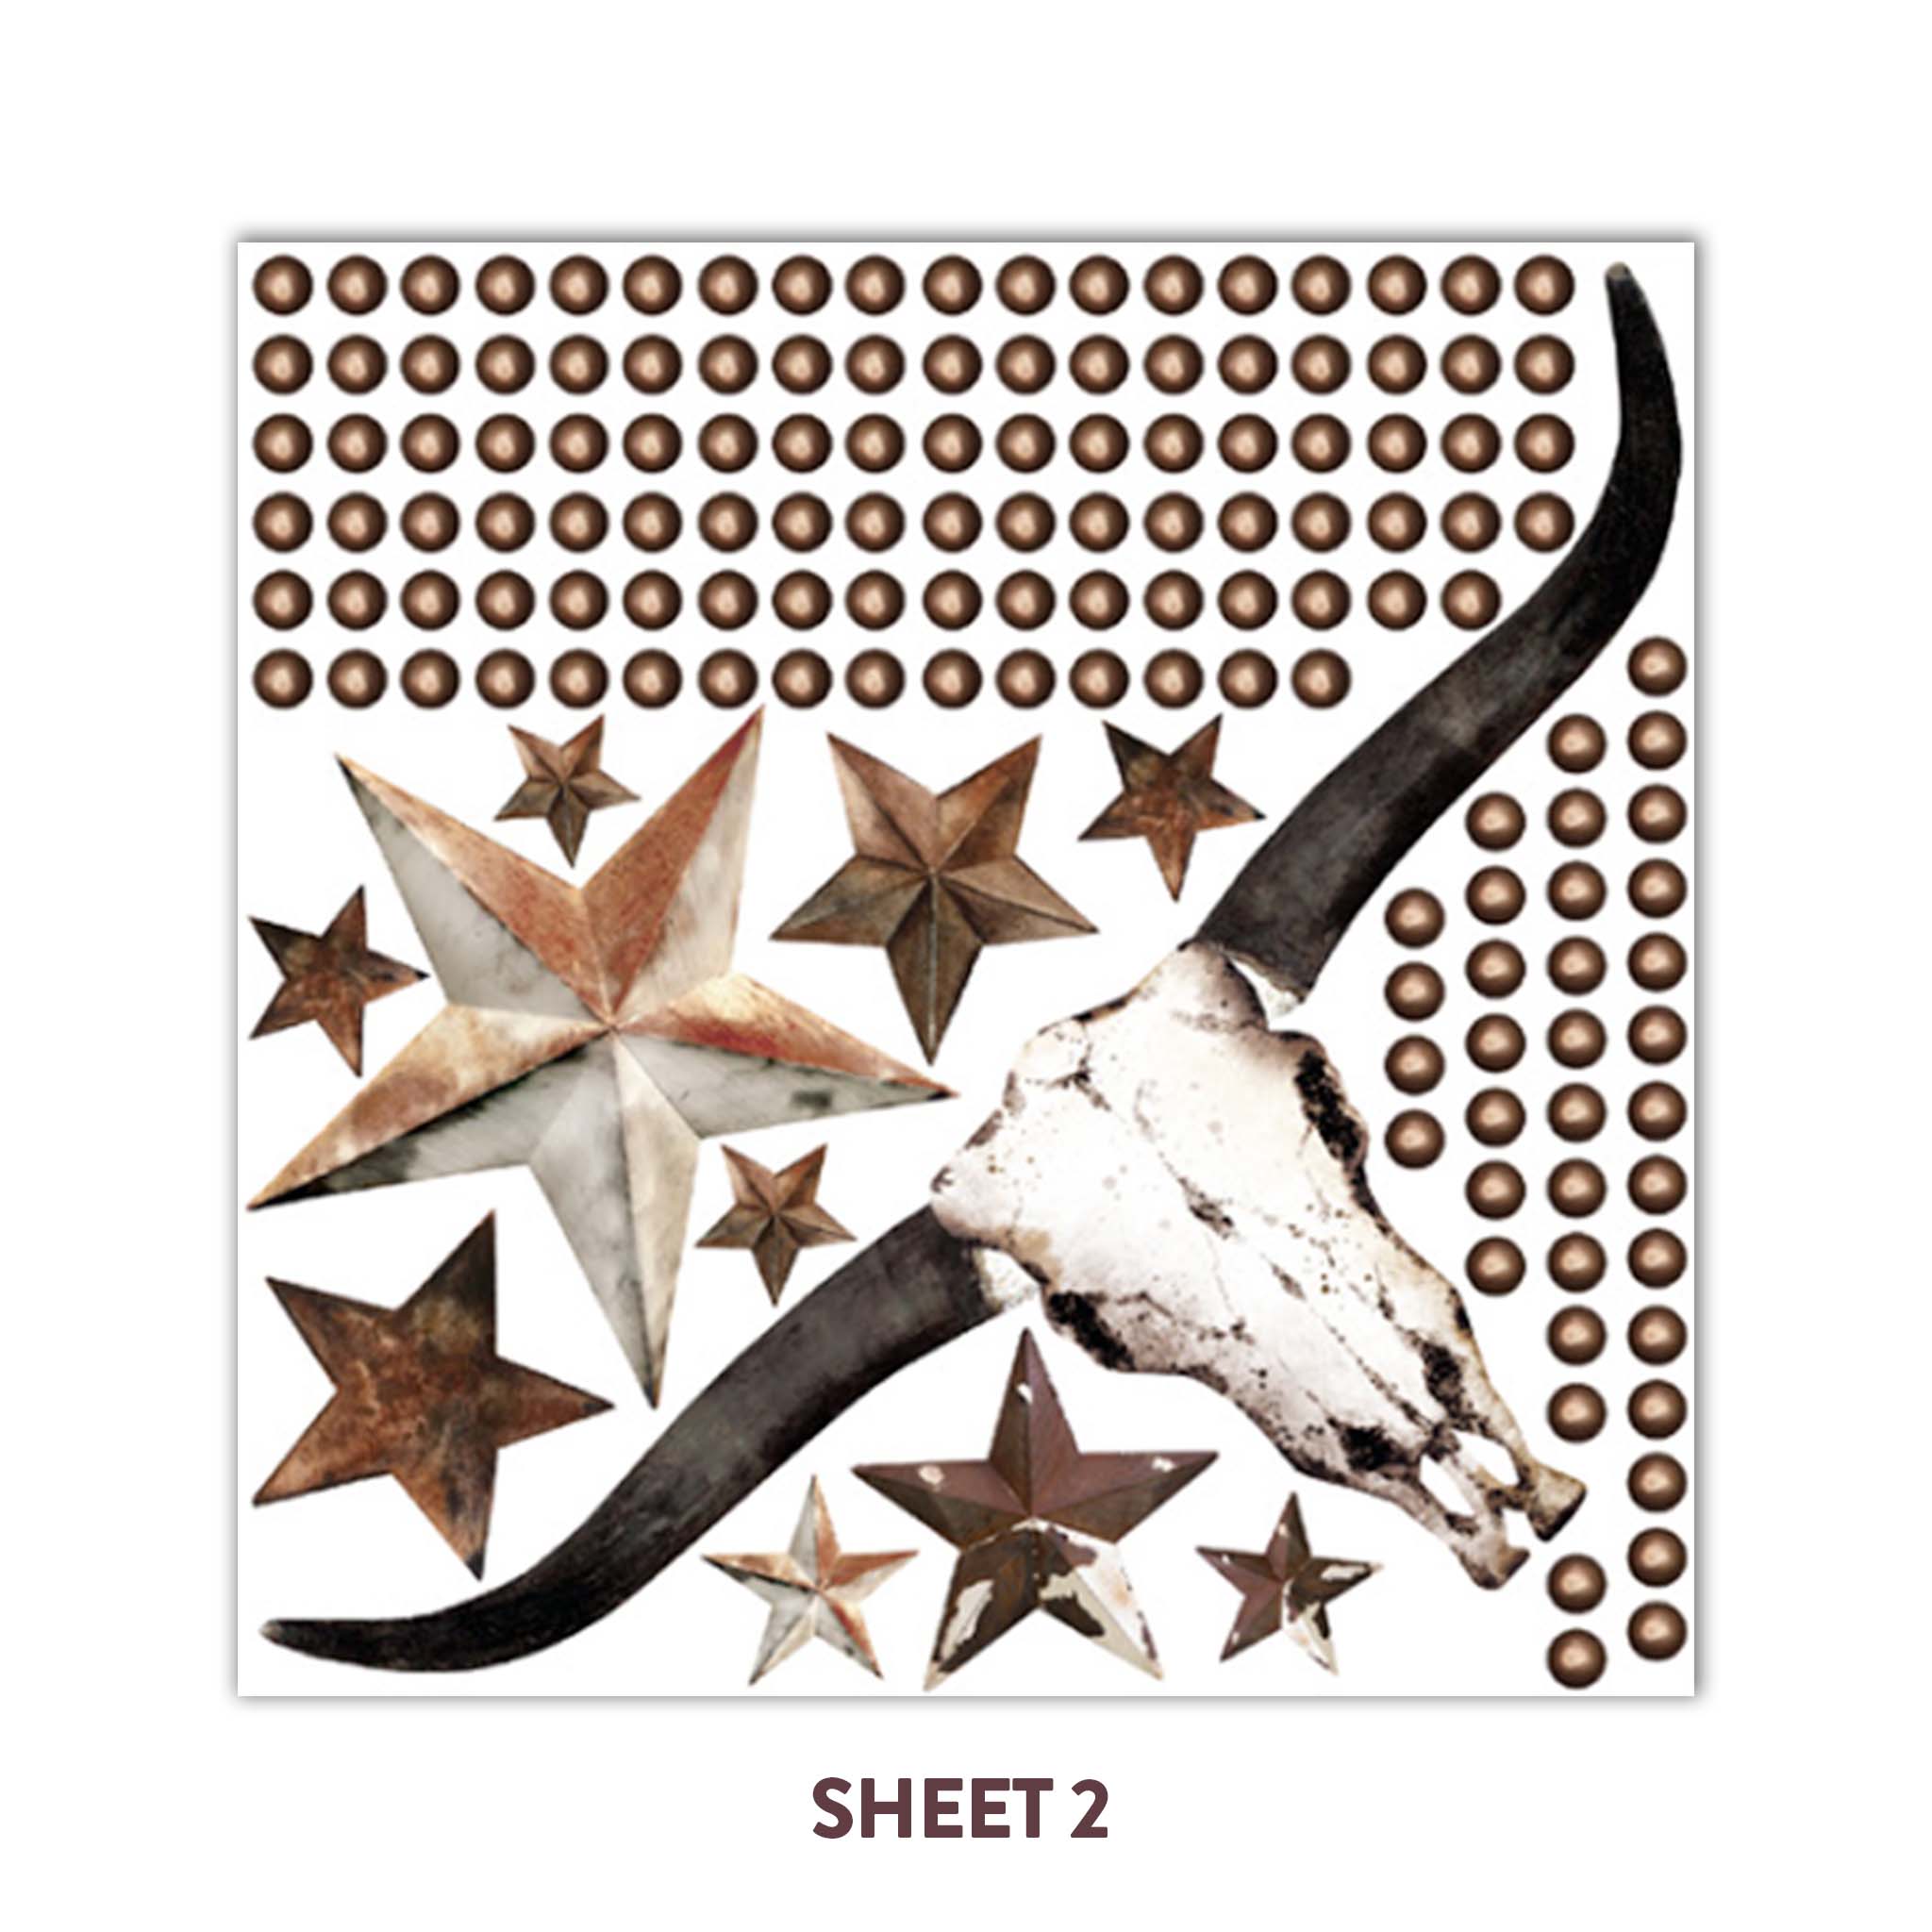 Sheet 2 of ReDesign with Prima's Wild West Whispers 12"x12" rub-on transfer that features rusted stars, a bull skull, and metal studs is against a white background.